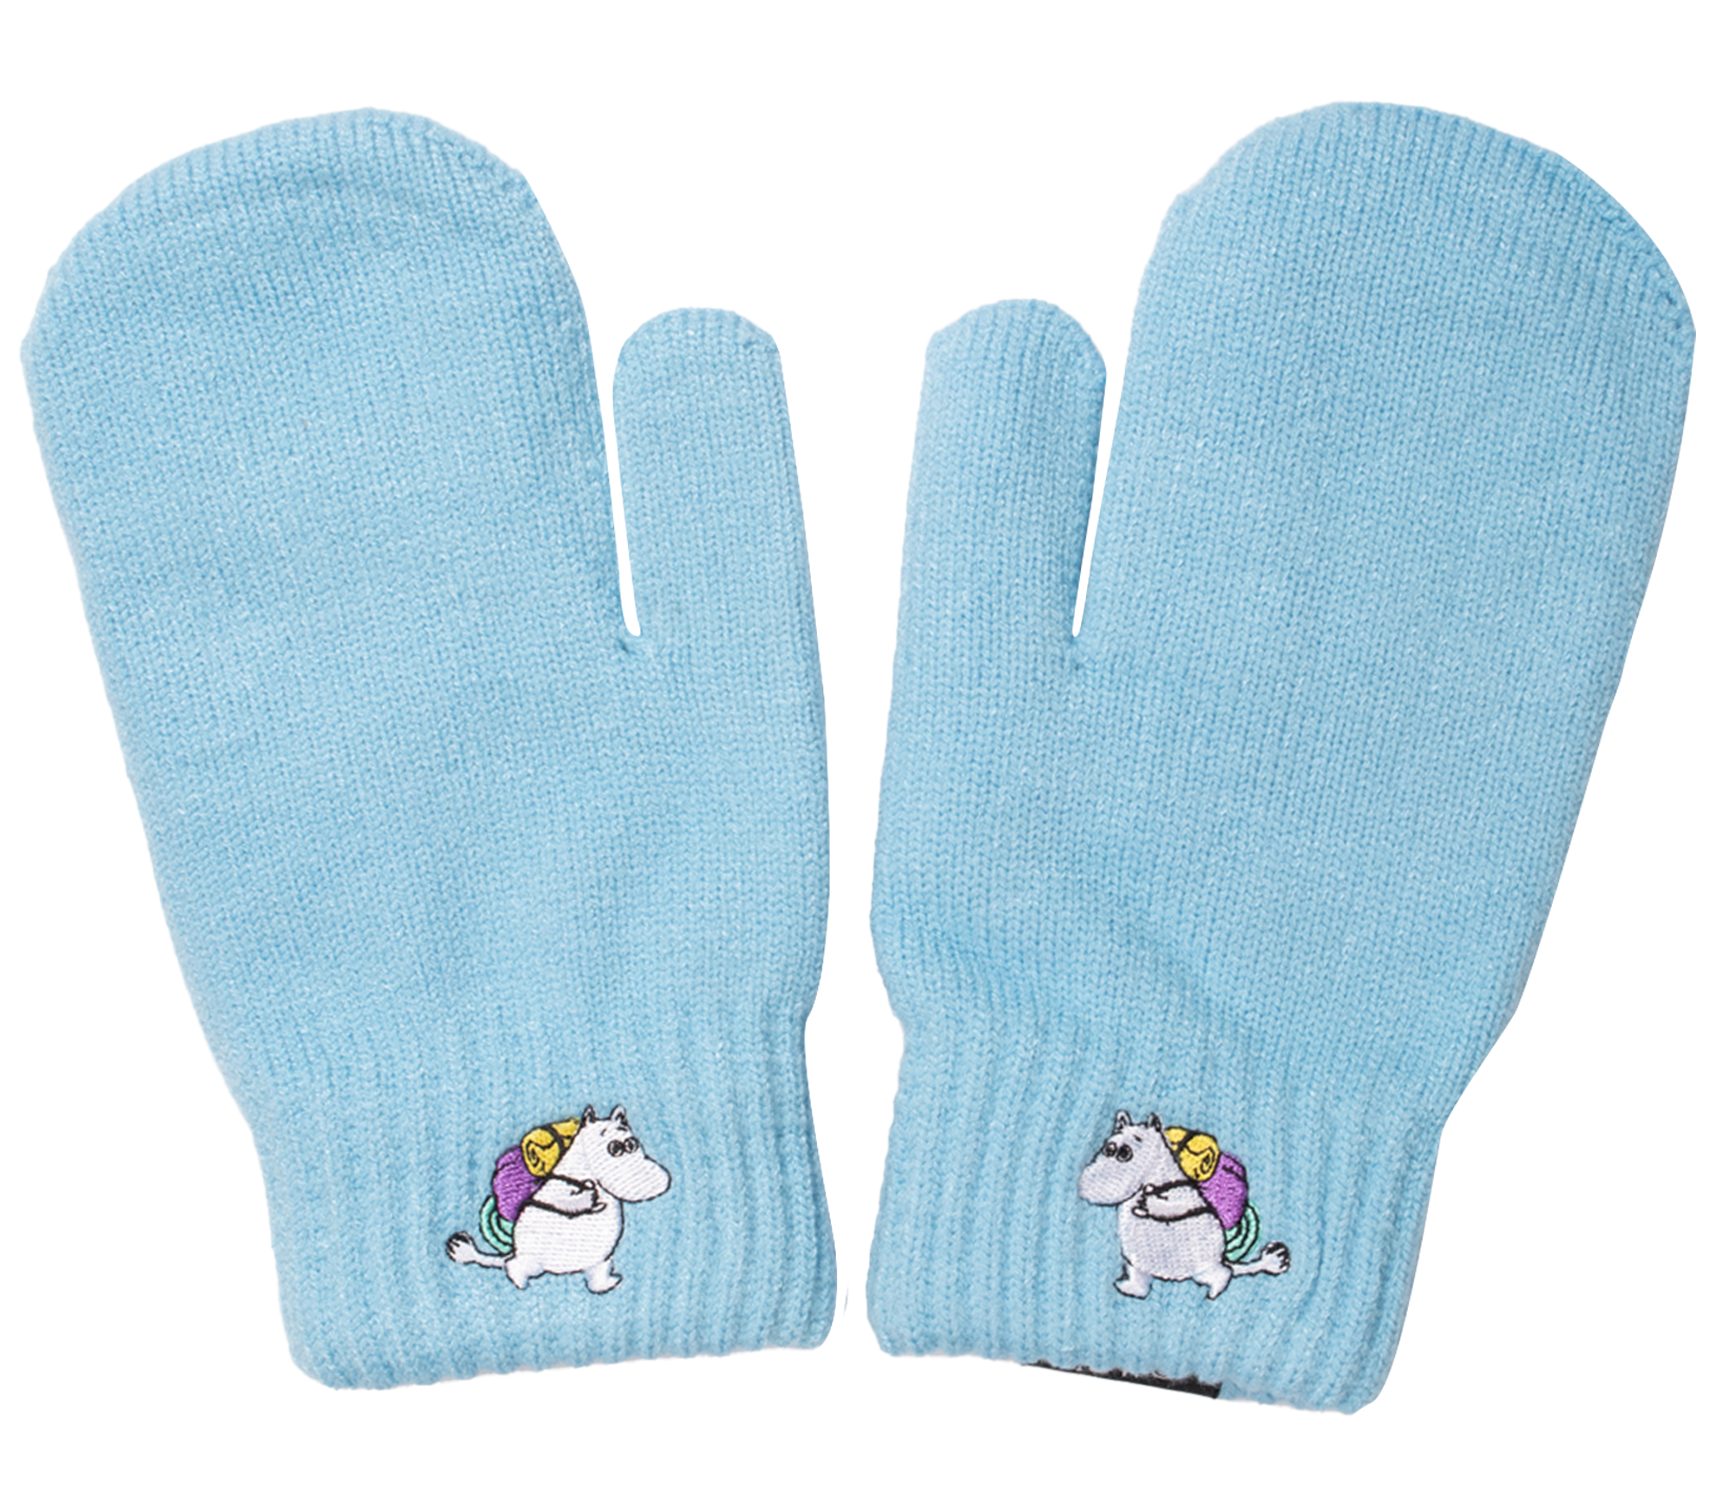 Moomintroll Mittens and Beanie Kids Combo - Light Blue